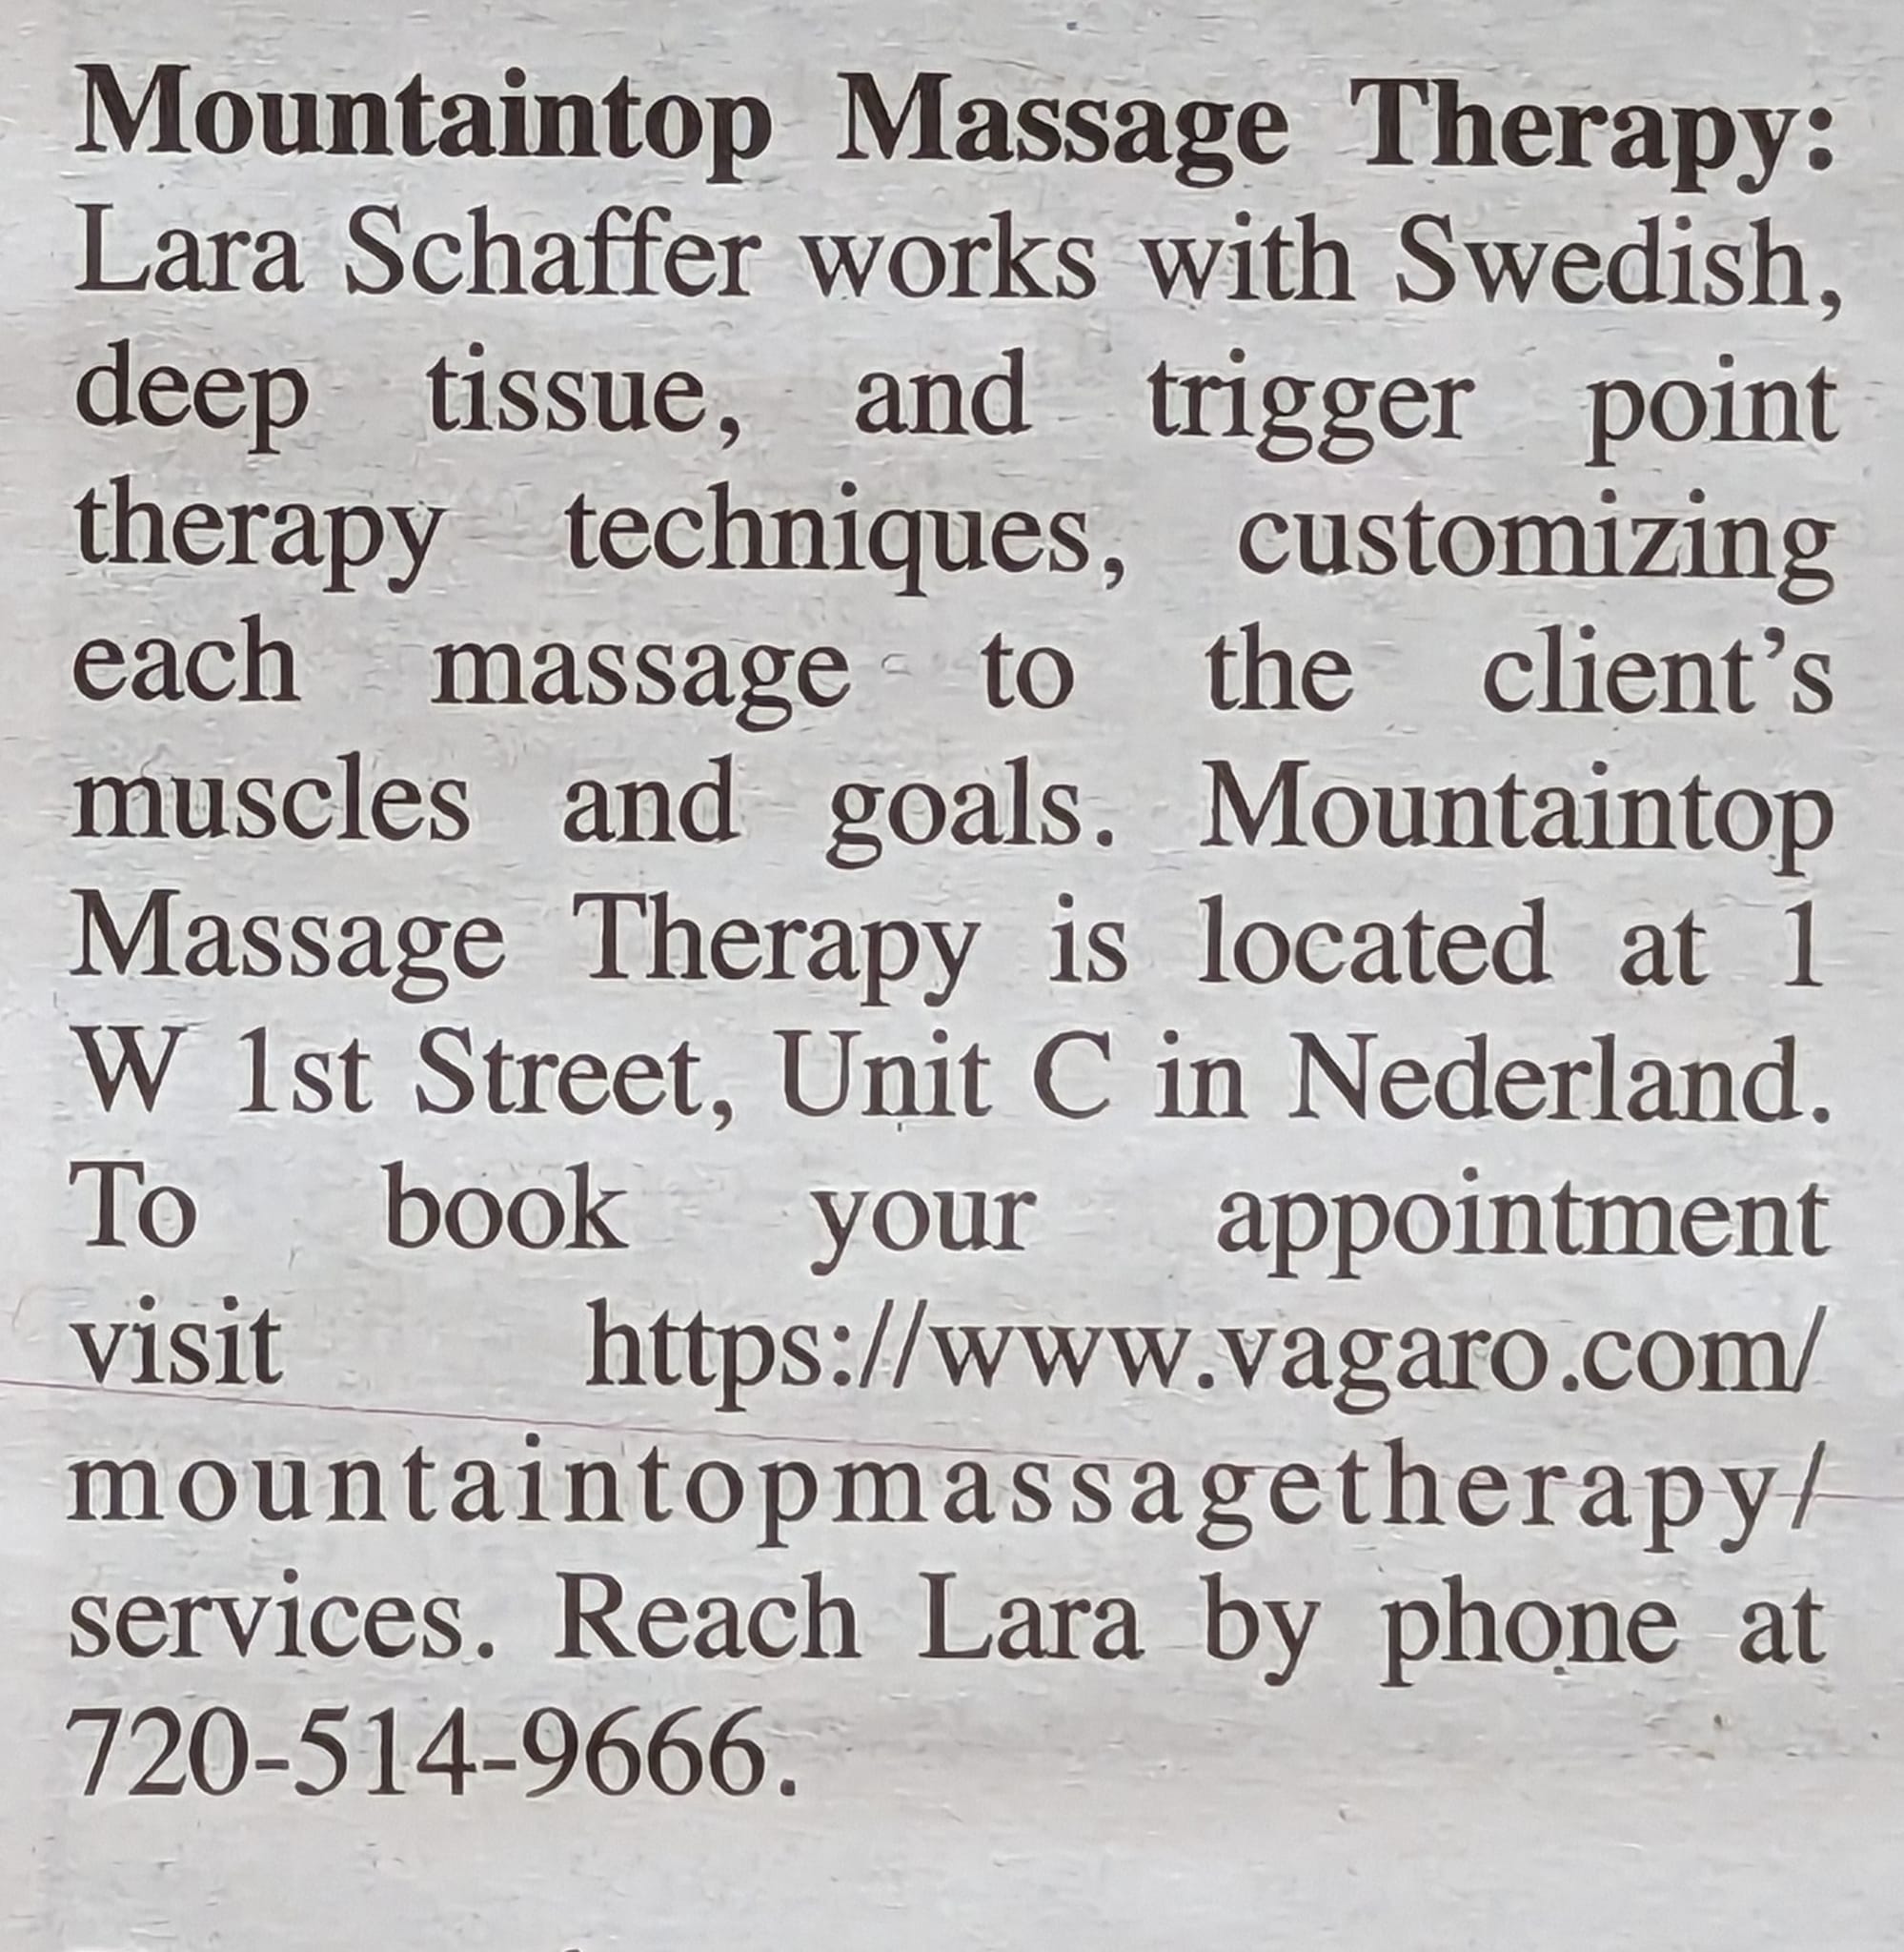 Mountaintop Massage Therapy 1 W 1st St #C, Nederland Colorado 80466